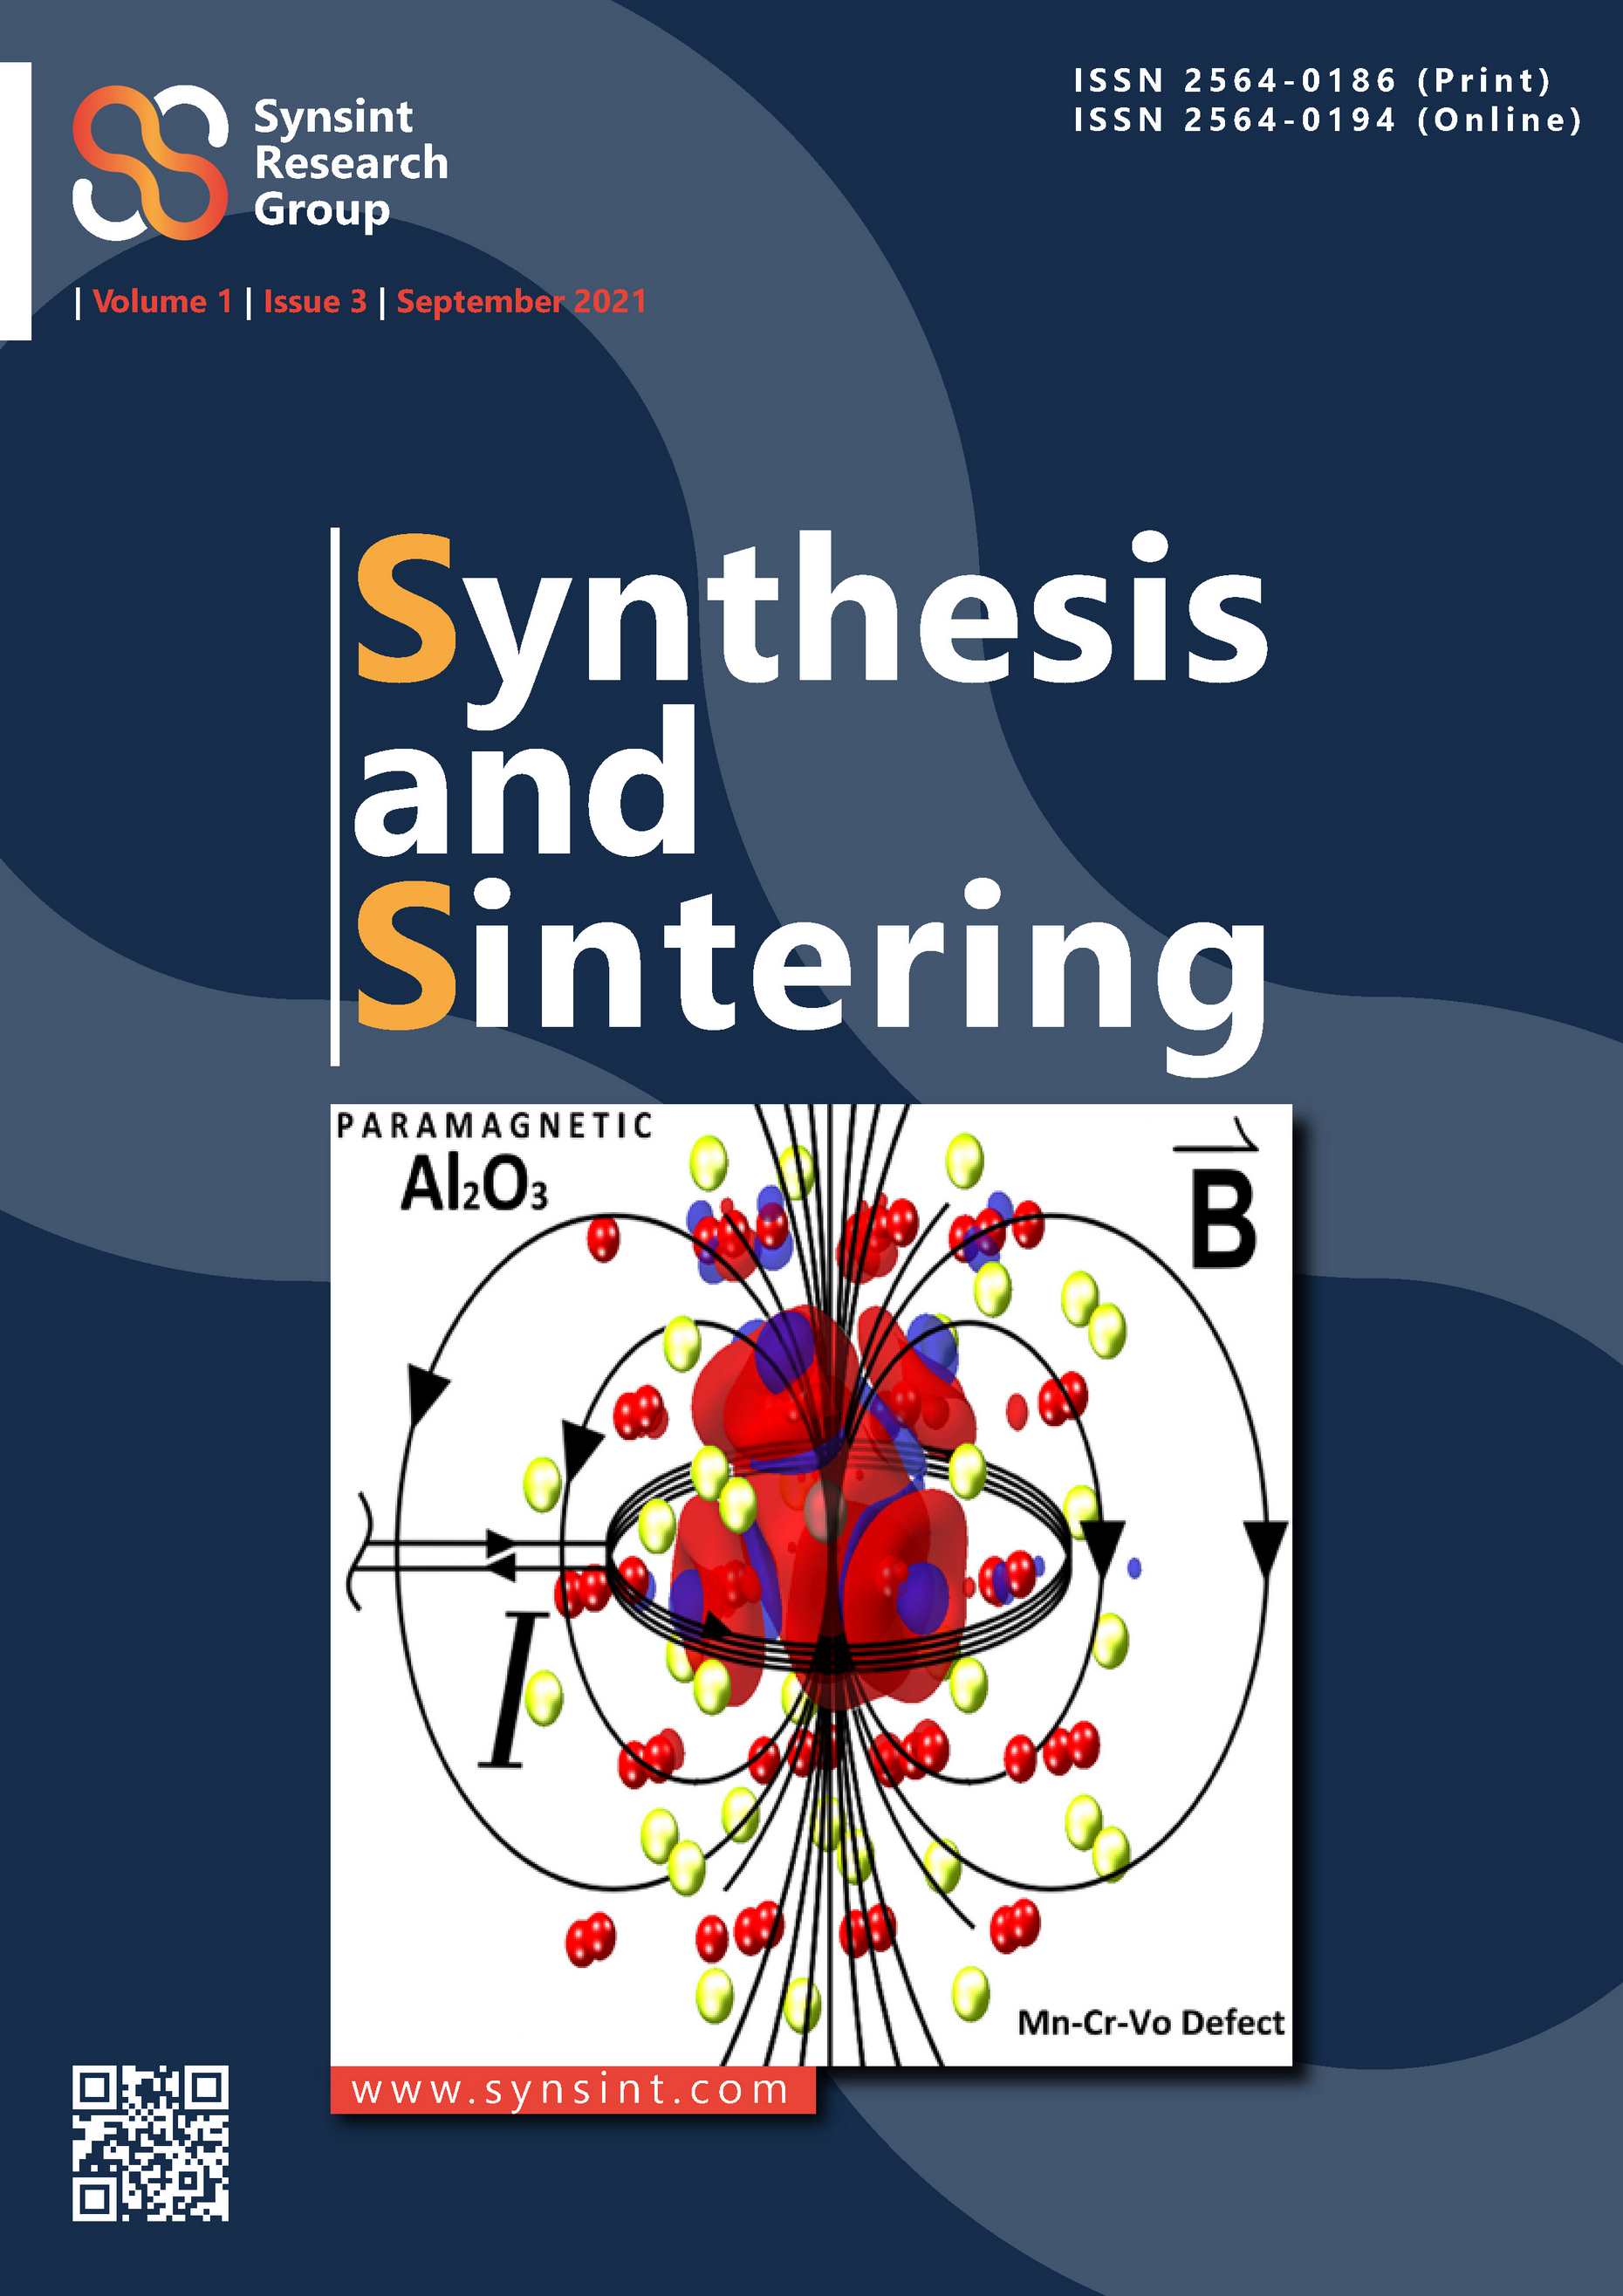 Synthesis and Sintering, Vol. 1, No. 3, 2021